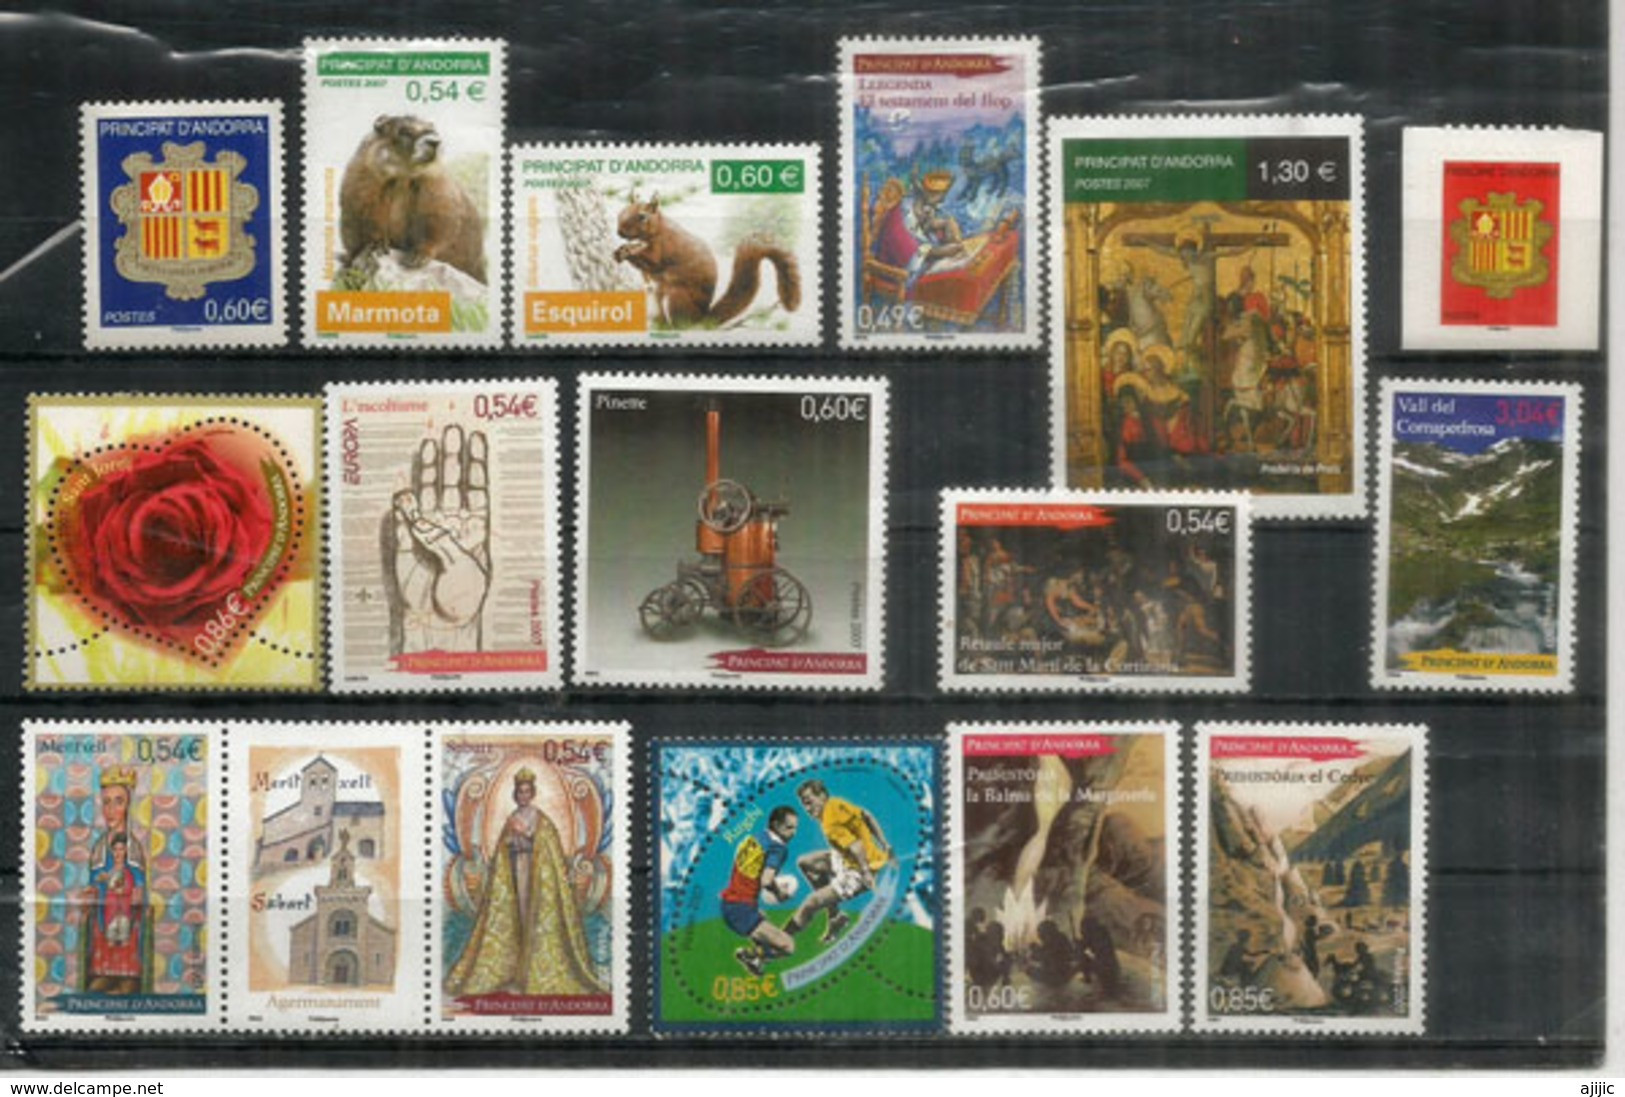 Année Complète 2007, 17 Timbres  Neufs ** Rugby World Cup, Prehistoire Andorrane,etc - Volledige Jaargang